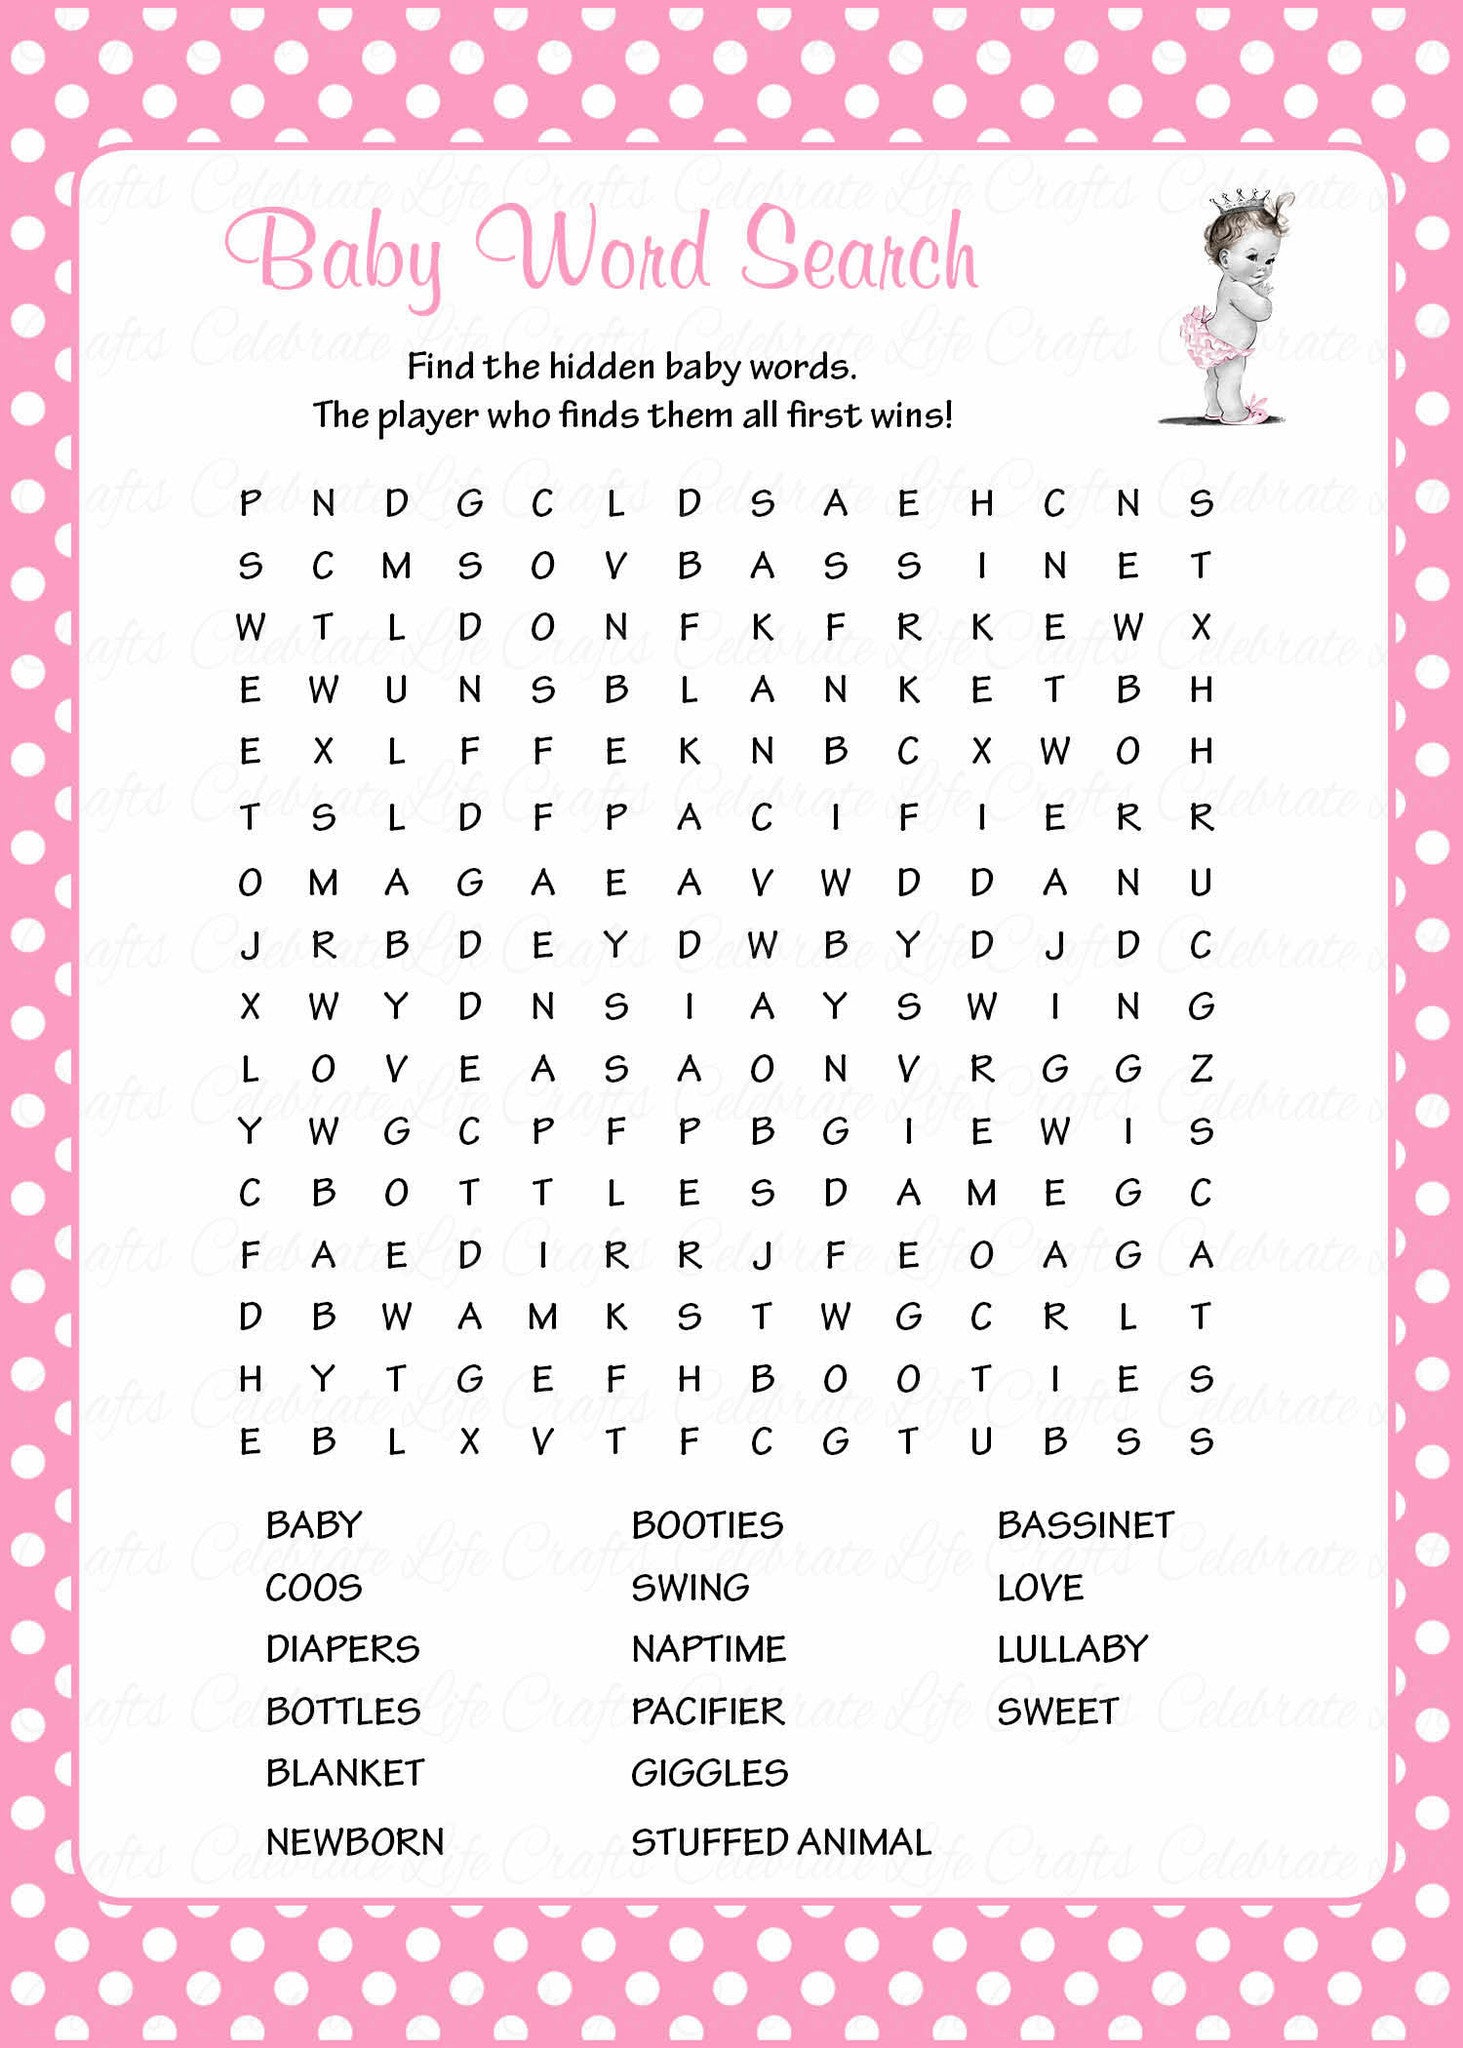 Word Search Baby Shower Game - Princess Baby Shower Theme for Baby Girl